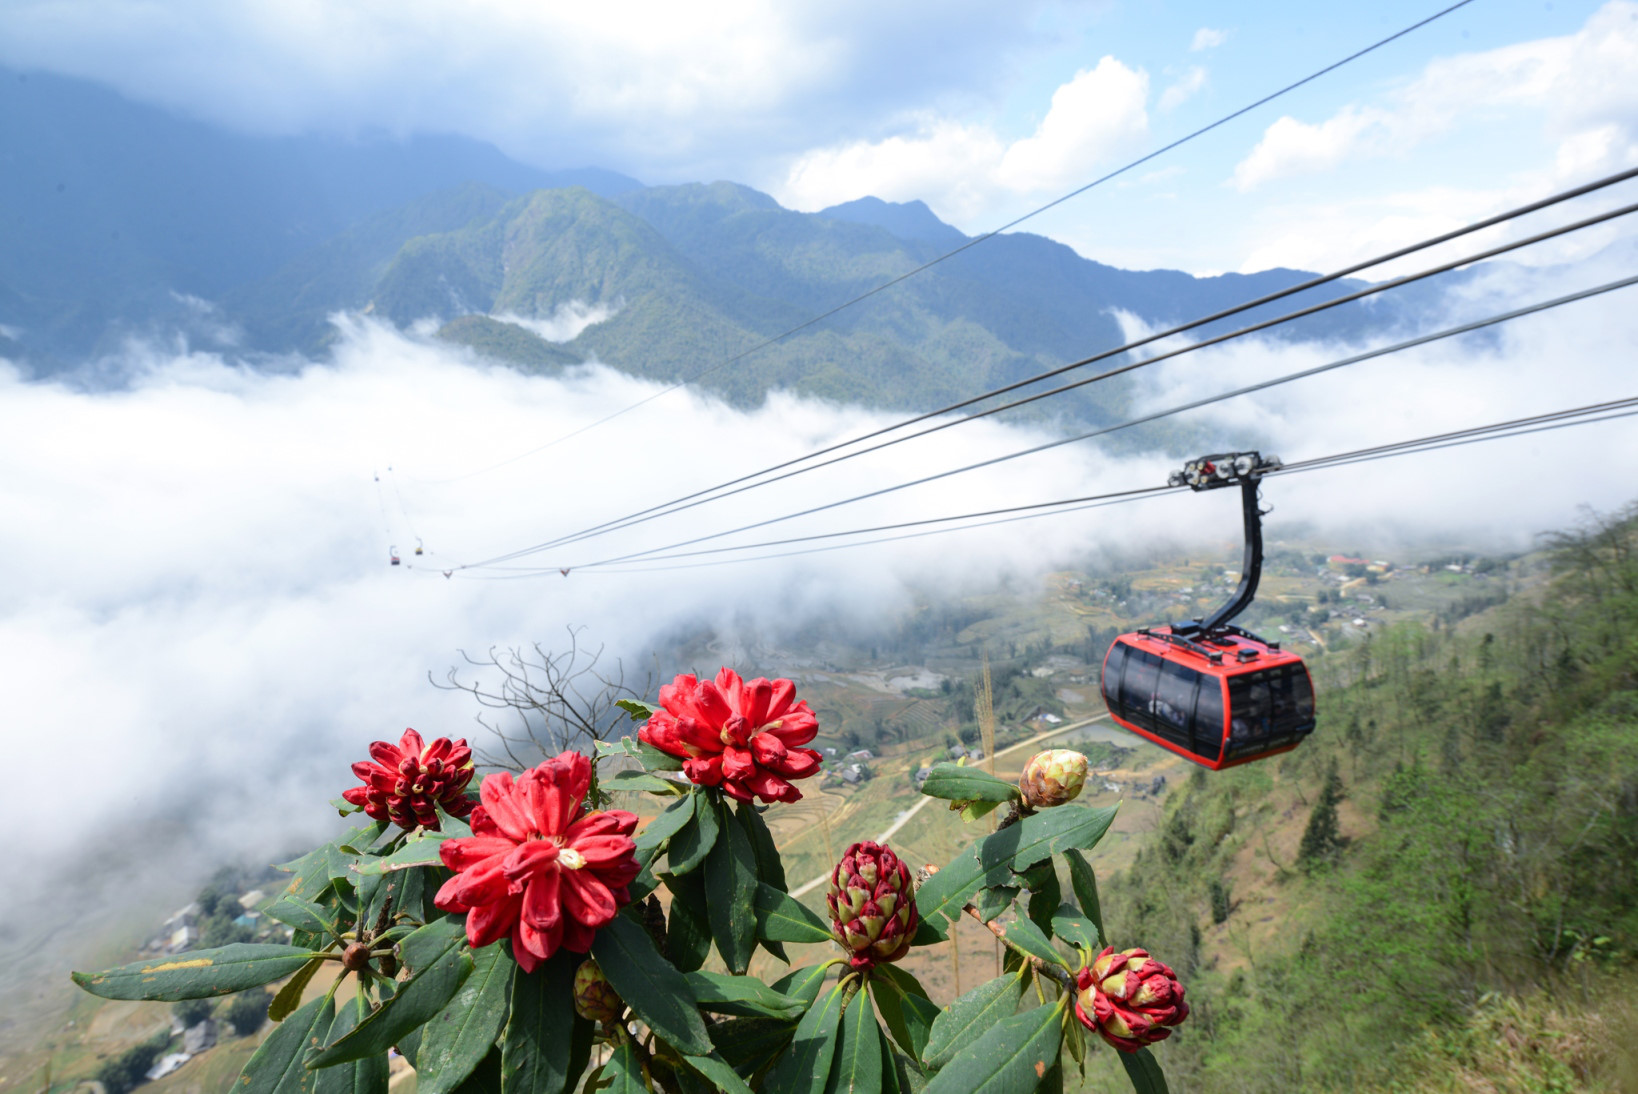 The colors of the flowers on Sapa town